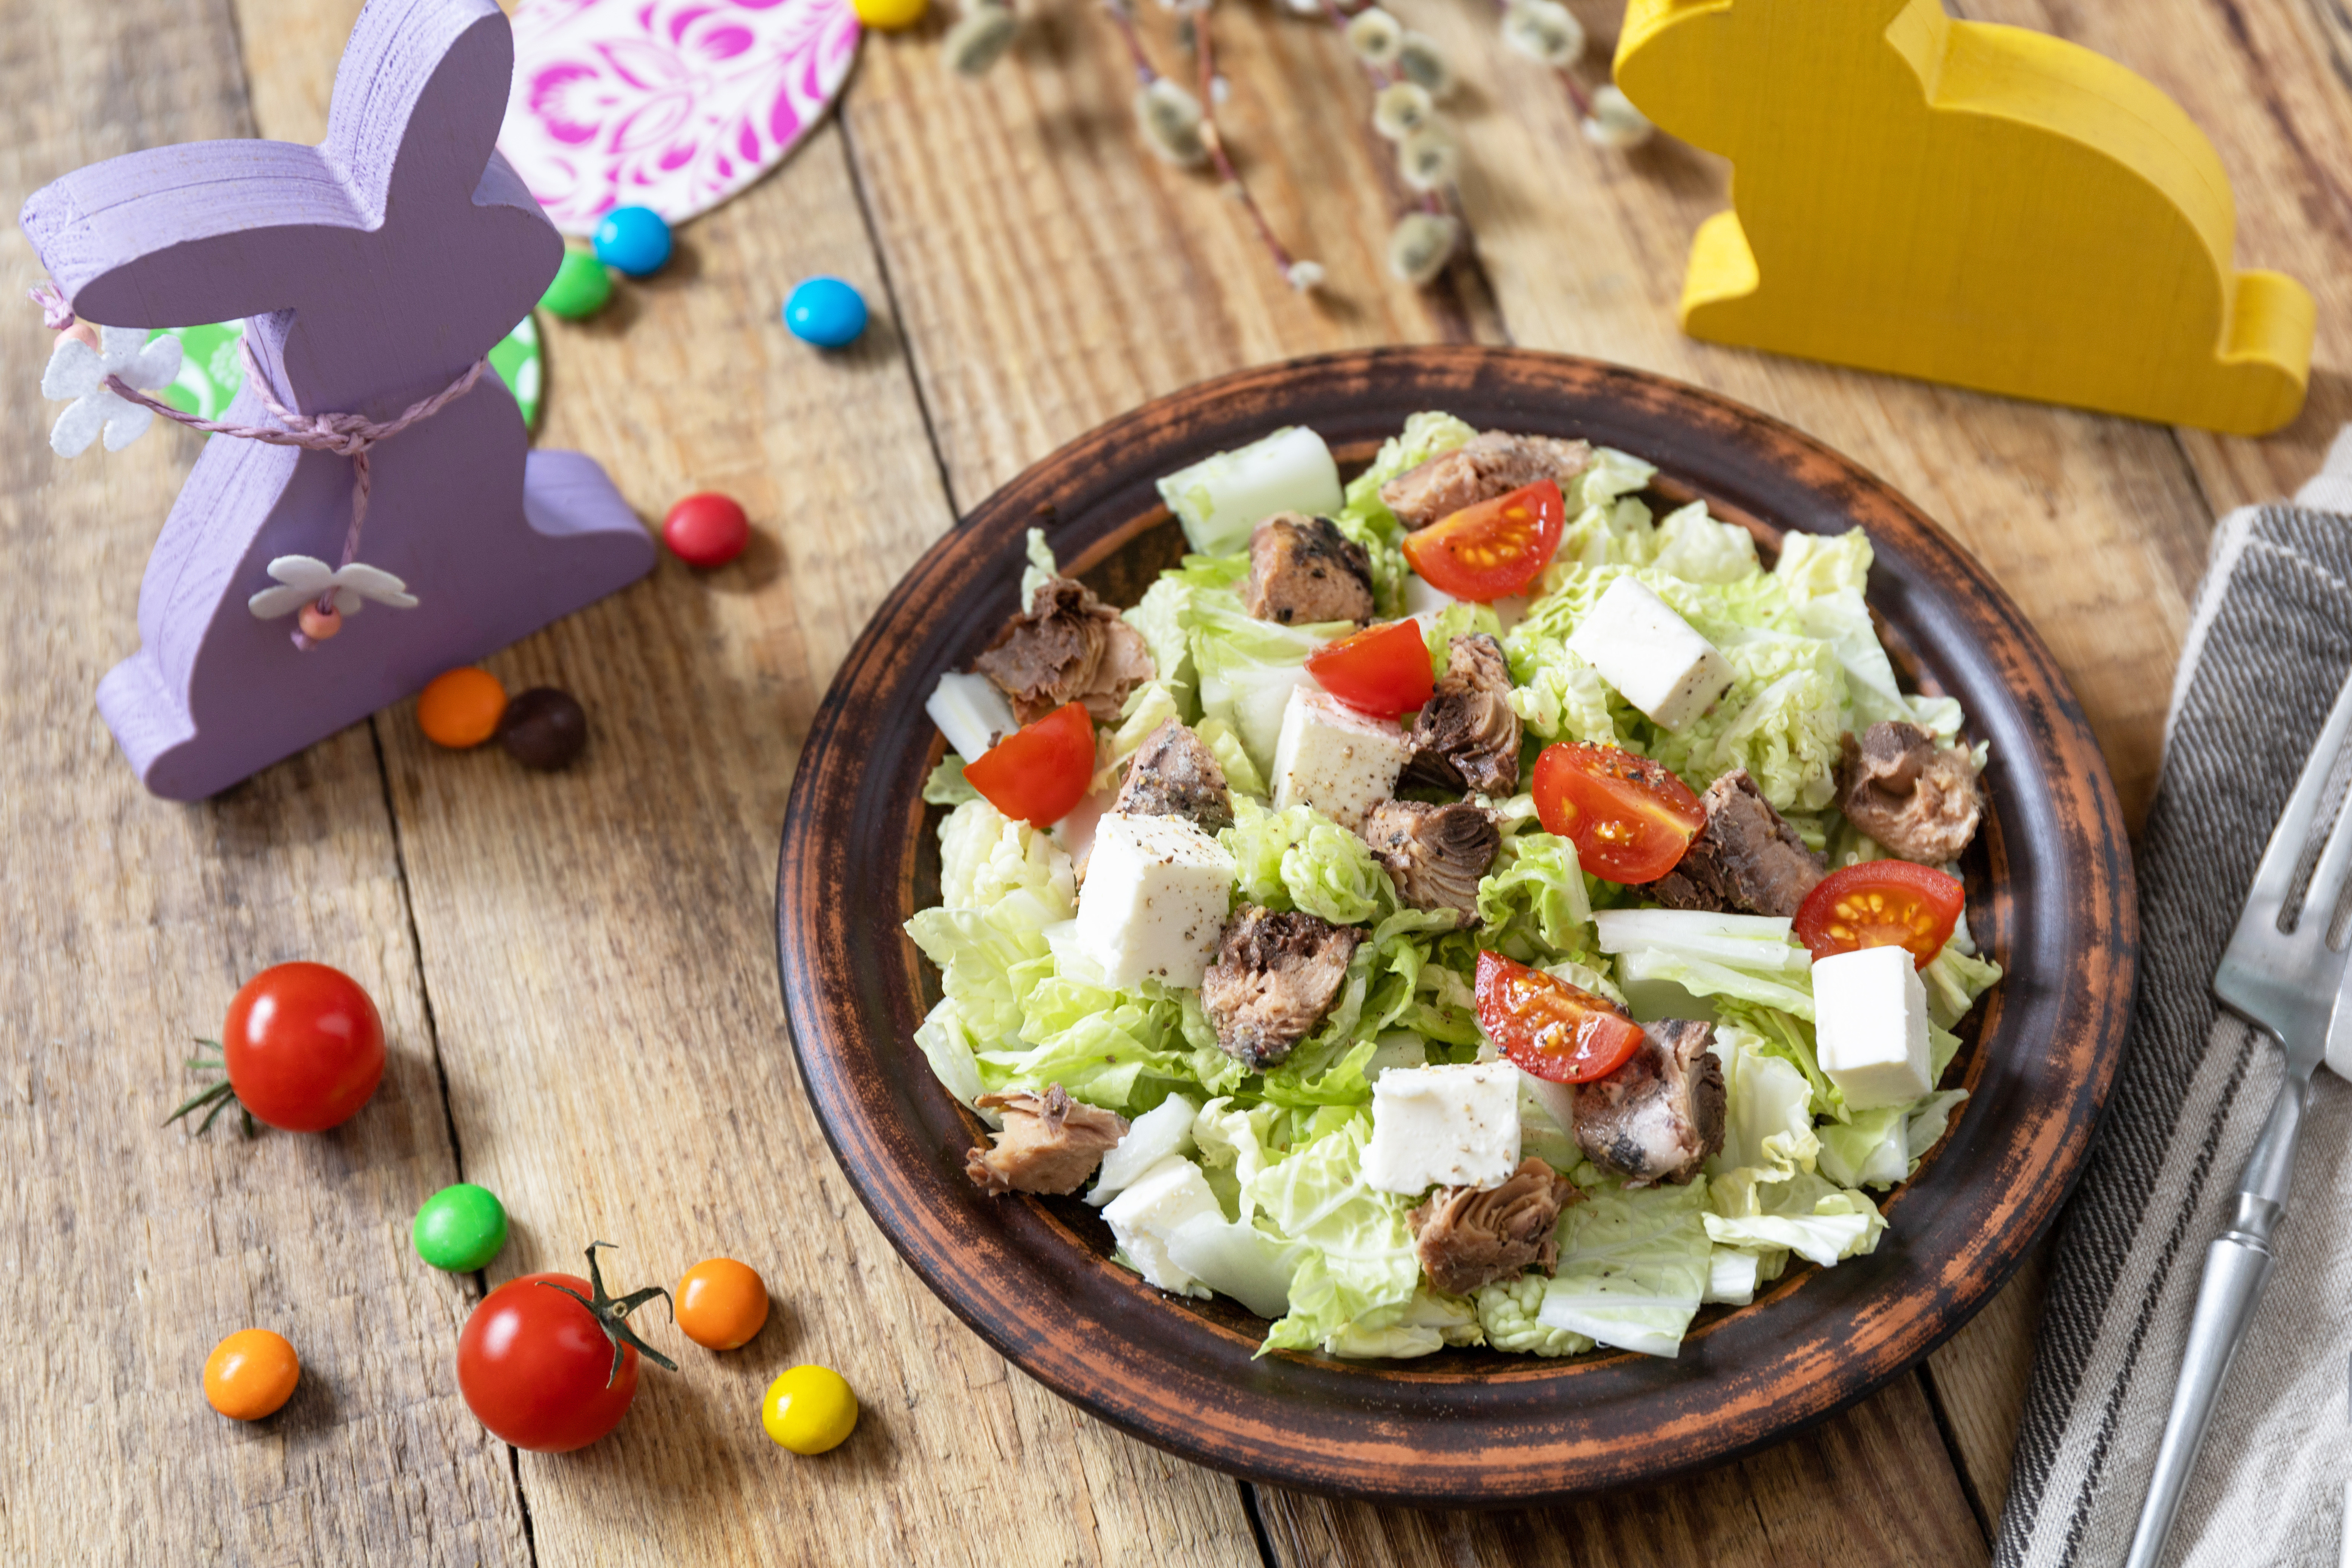 Holiday food, easter salad. Salad with chinese cabbage, feta, cherry tomatoes and canned tuna and vinegar dressing on a festive table.